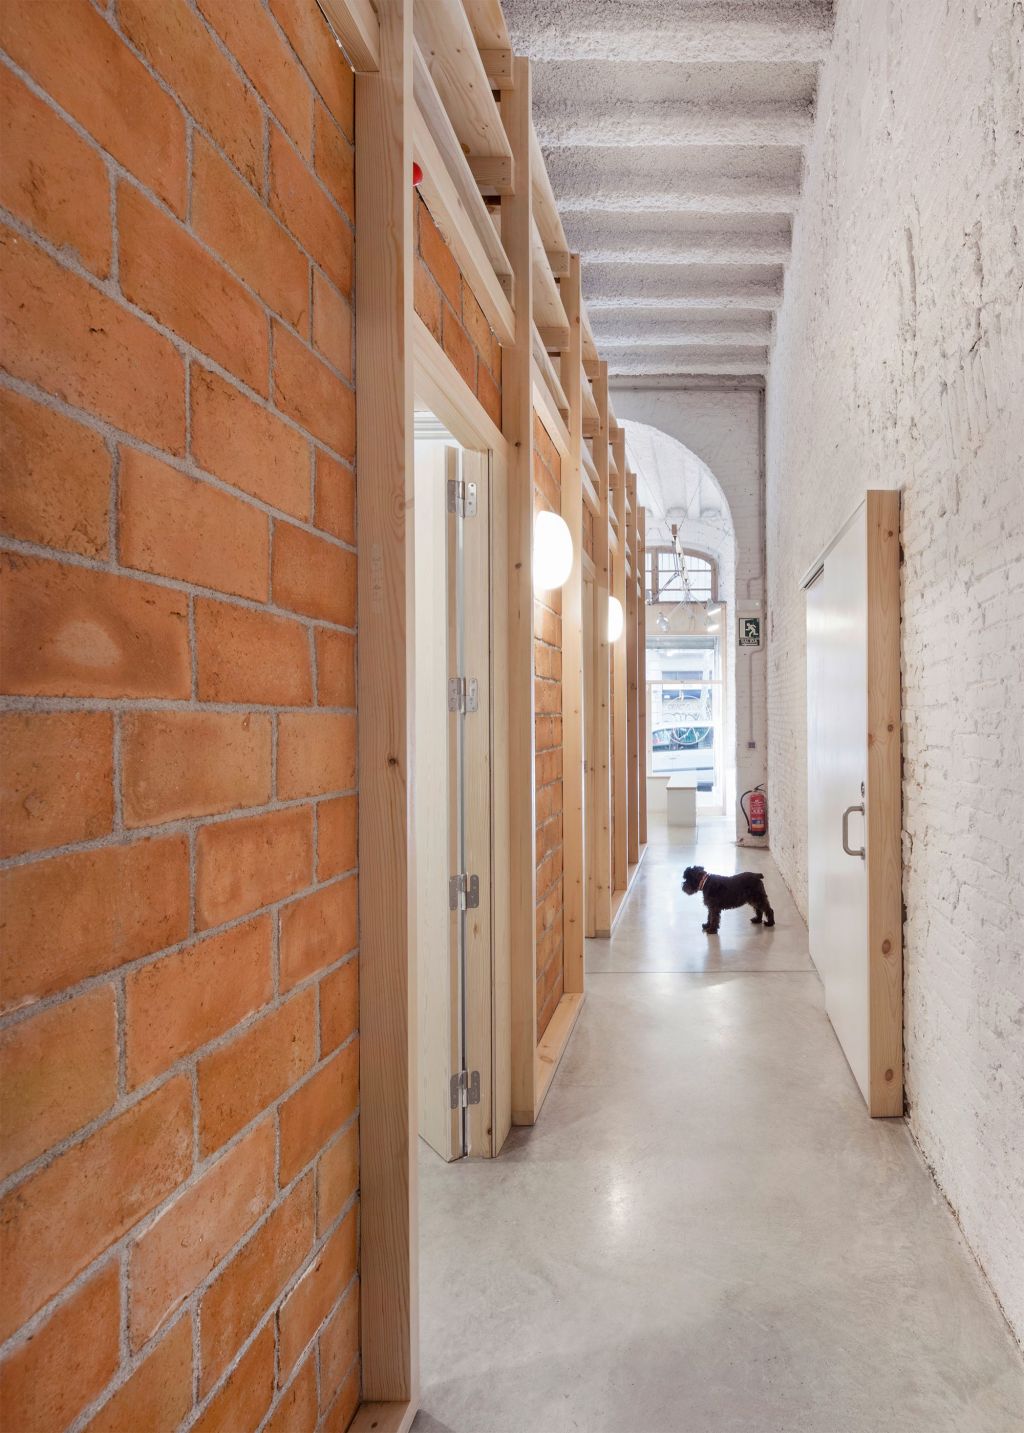 DESIGN AND CONSTRUCTION OF A VETERINARY CLINIC IN SANT ANTONI 3